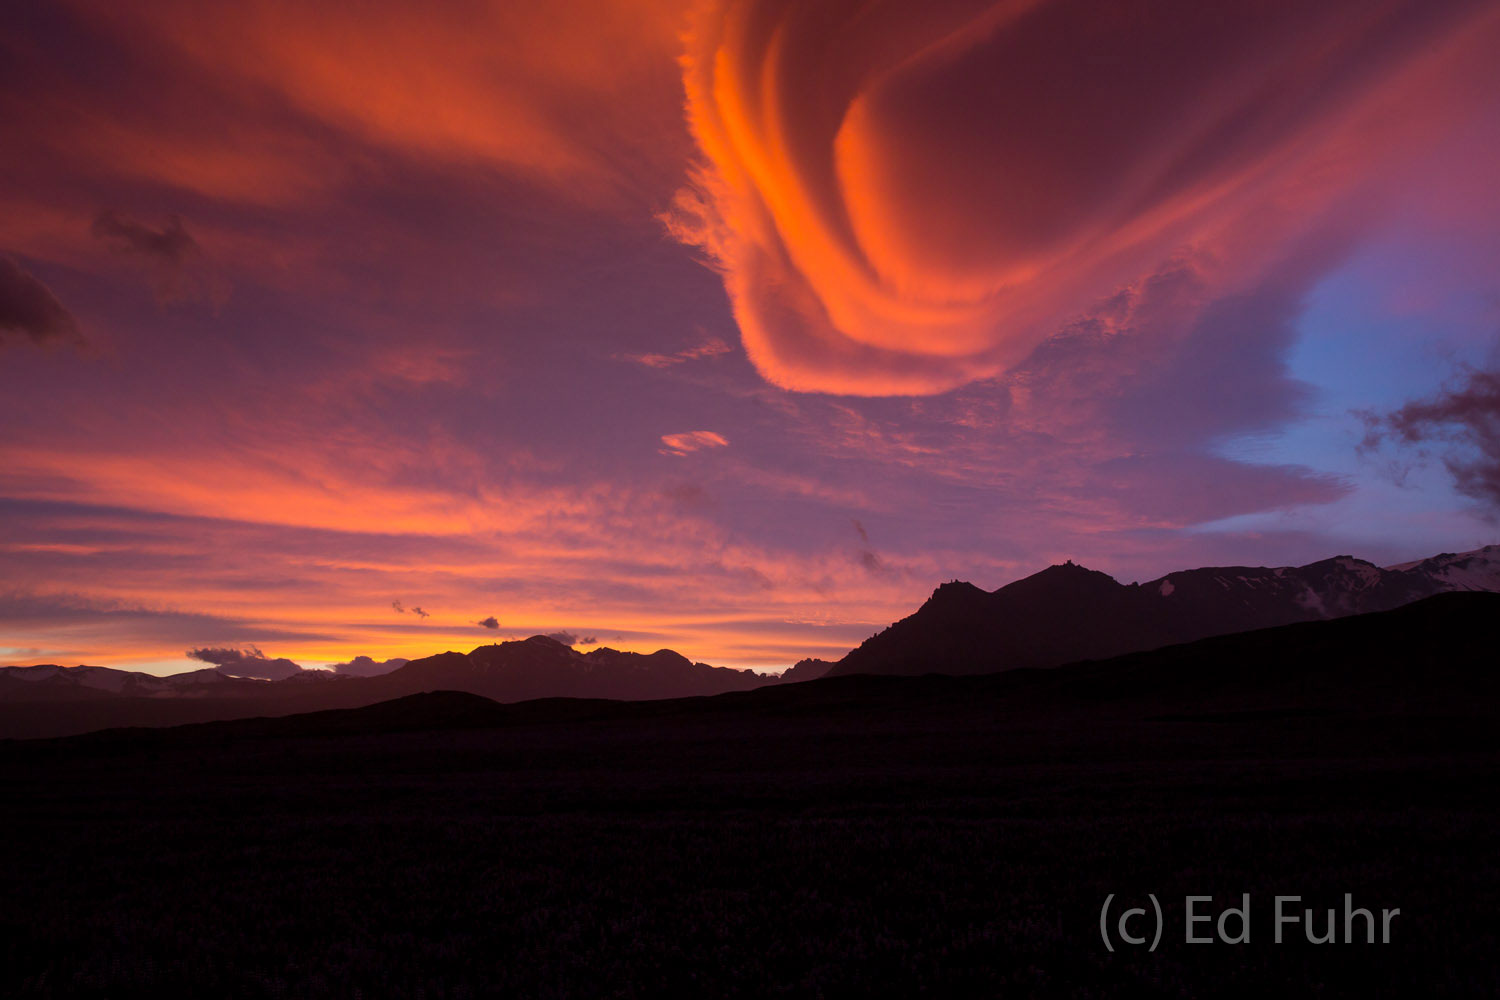 An amazing sunset, strong winds and lenticular clouds above the mountain range give the appearance or an alien invasion.